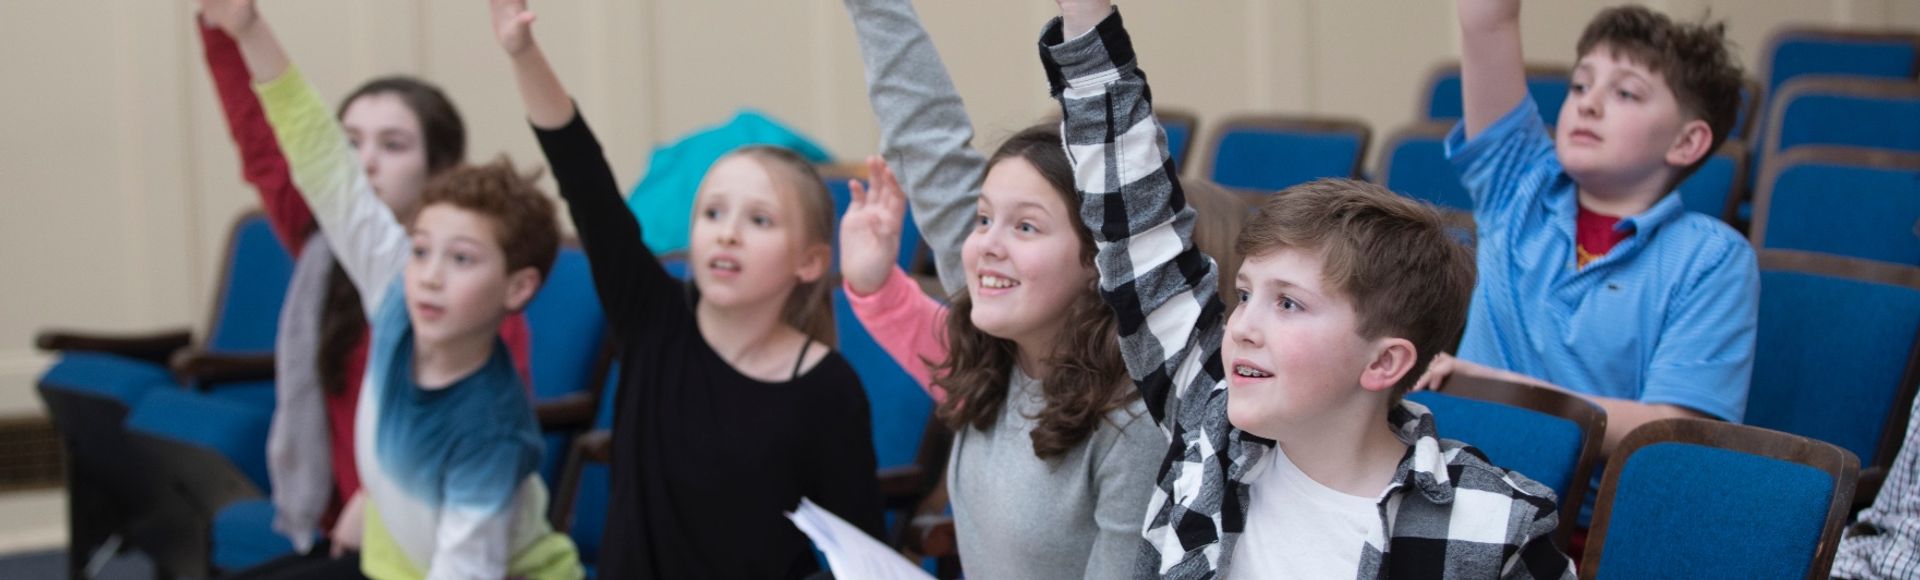 children with hands raised eager to answer a question